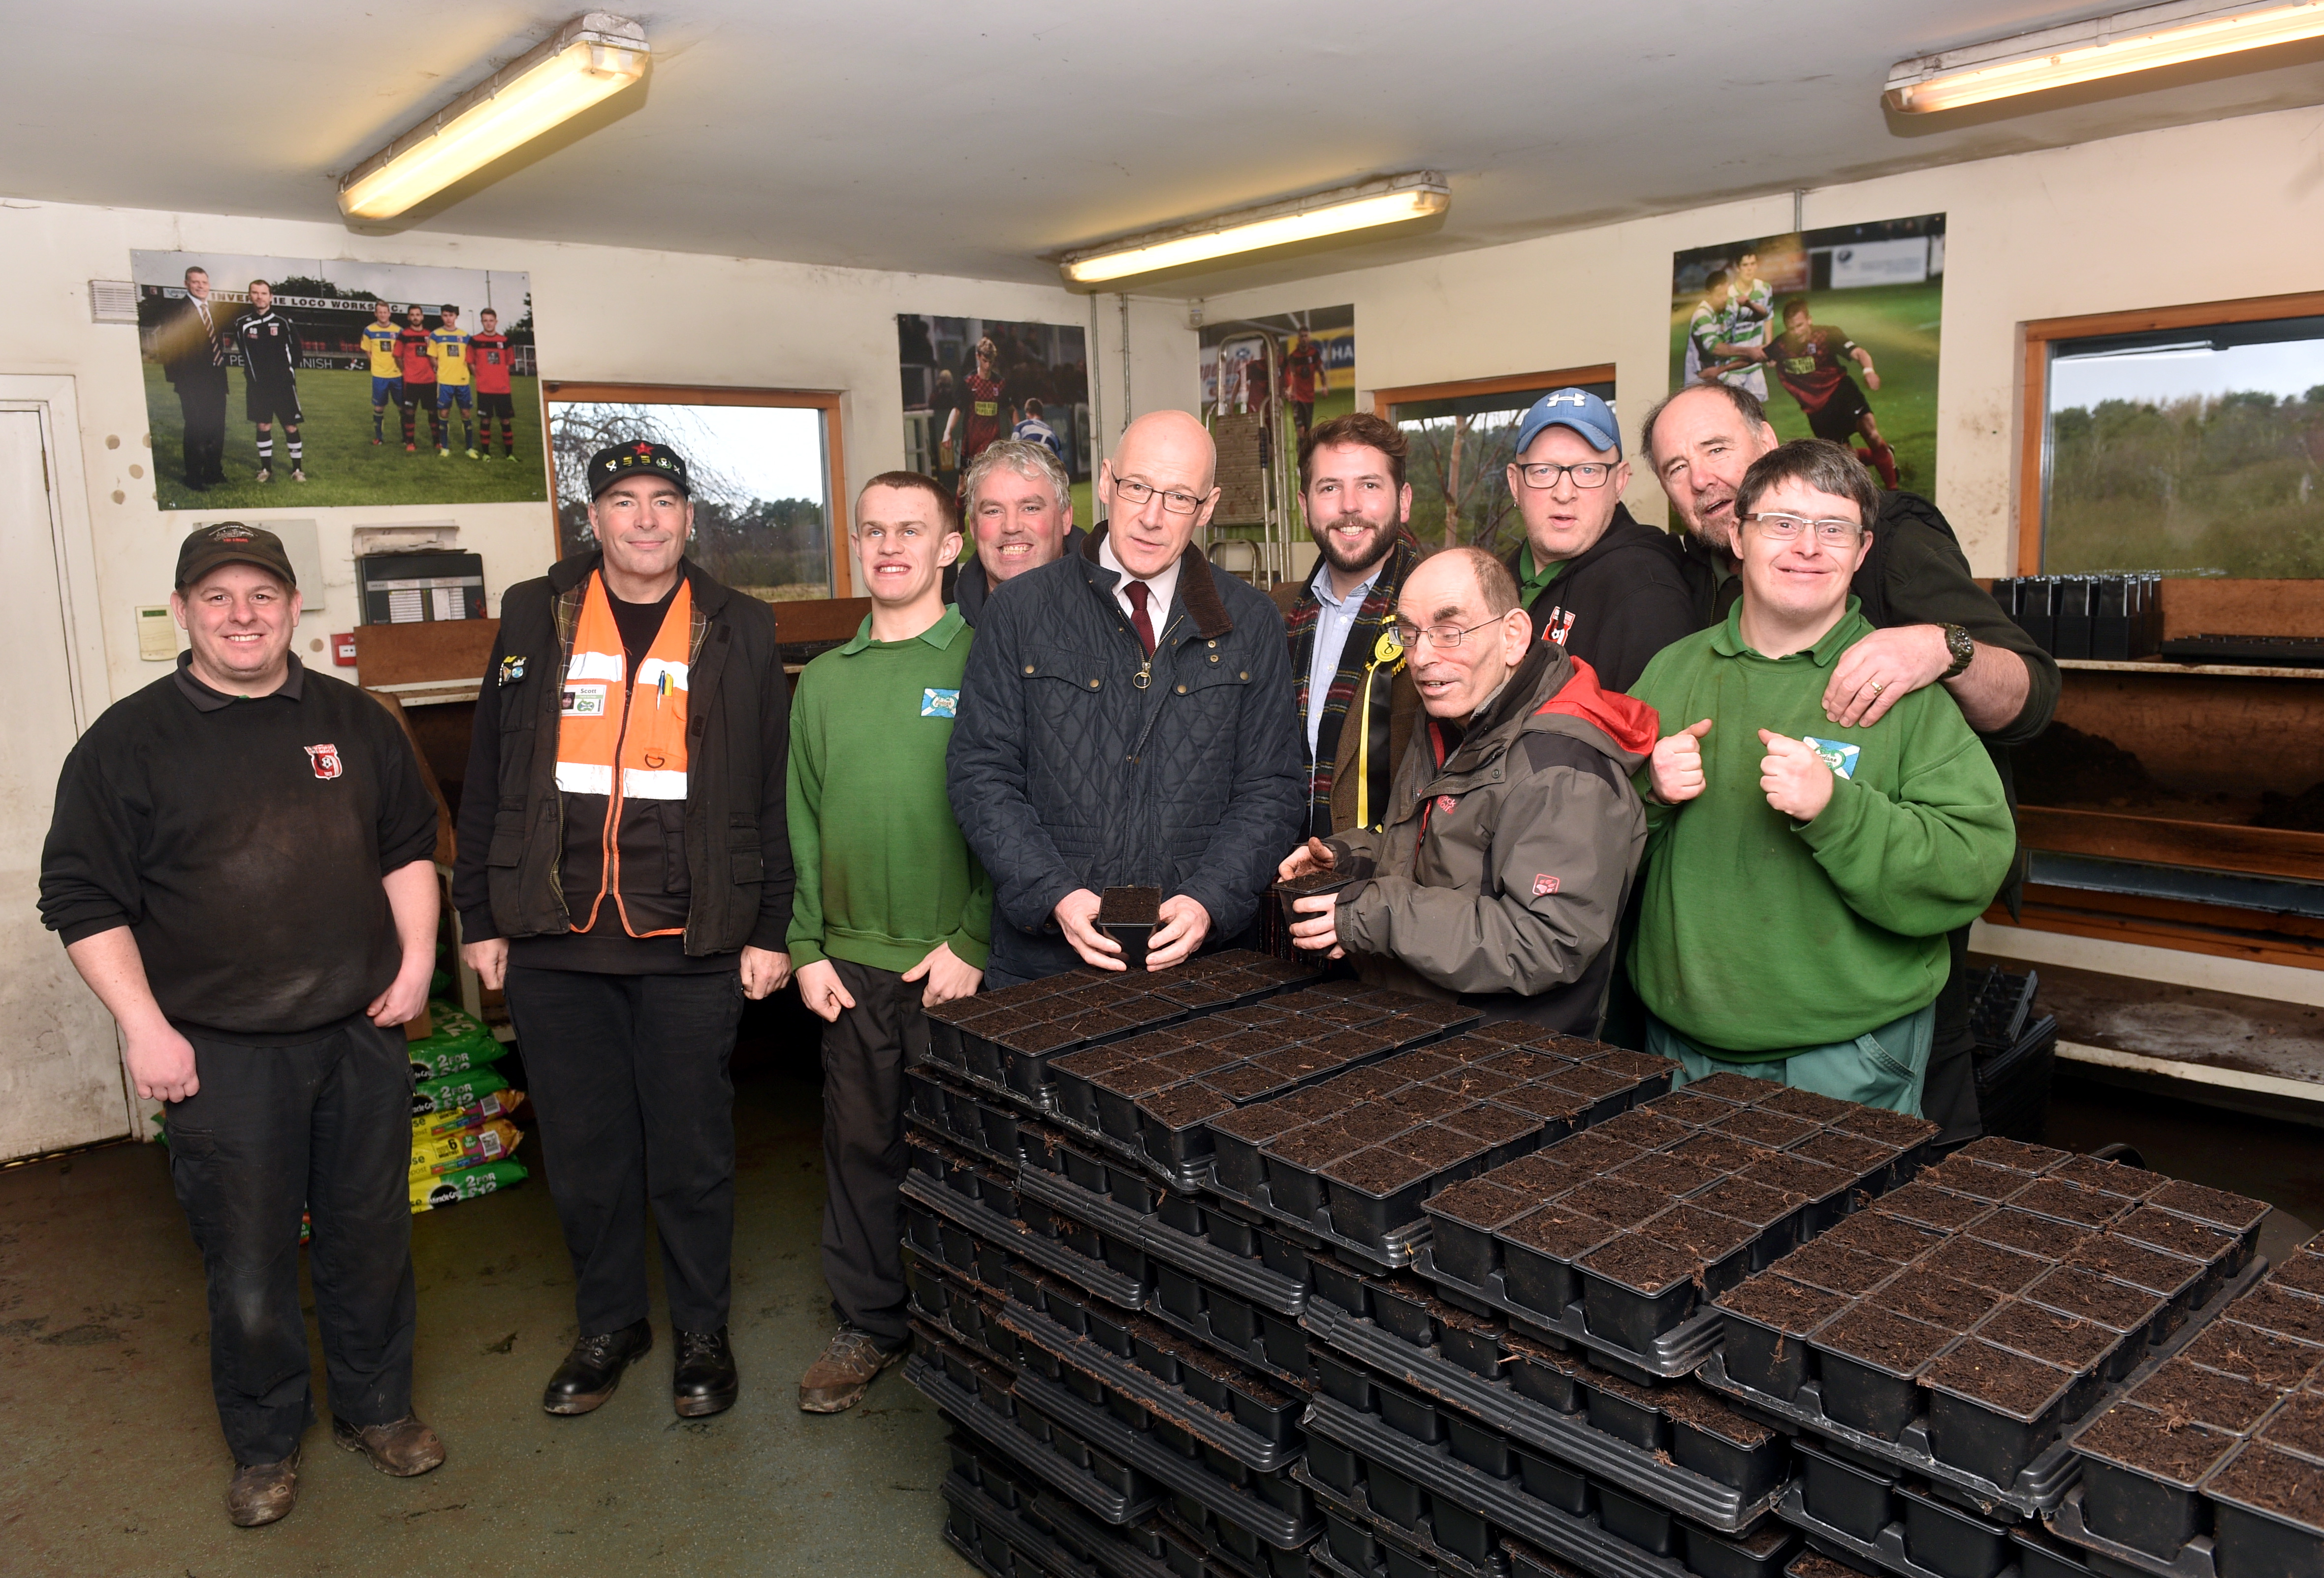 Pictured are John Swinney Deputy First Minister and Fergus Mutch, SNP candidate for West Aberdeenshire and Kincardine, on the campaign trail talking to members of staff at Foxlane Garden Centre, Westhill.